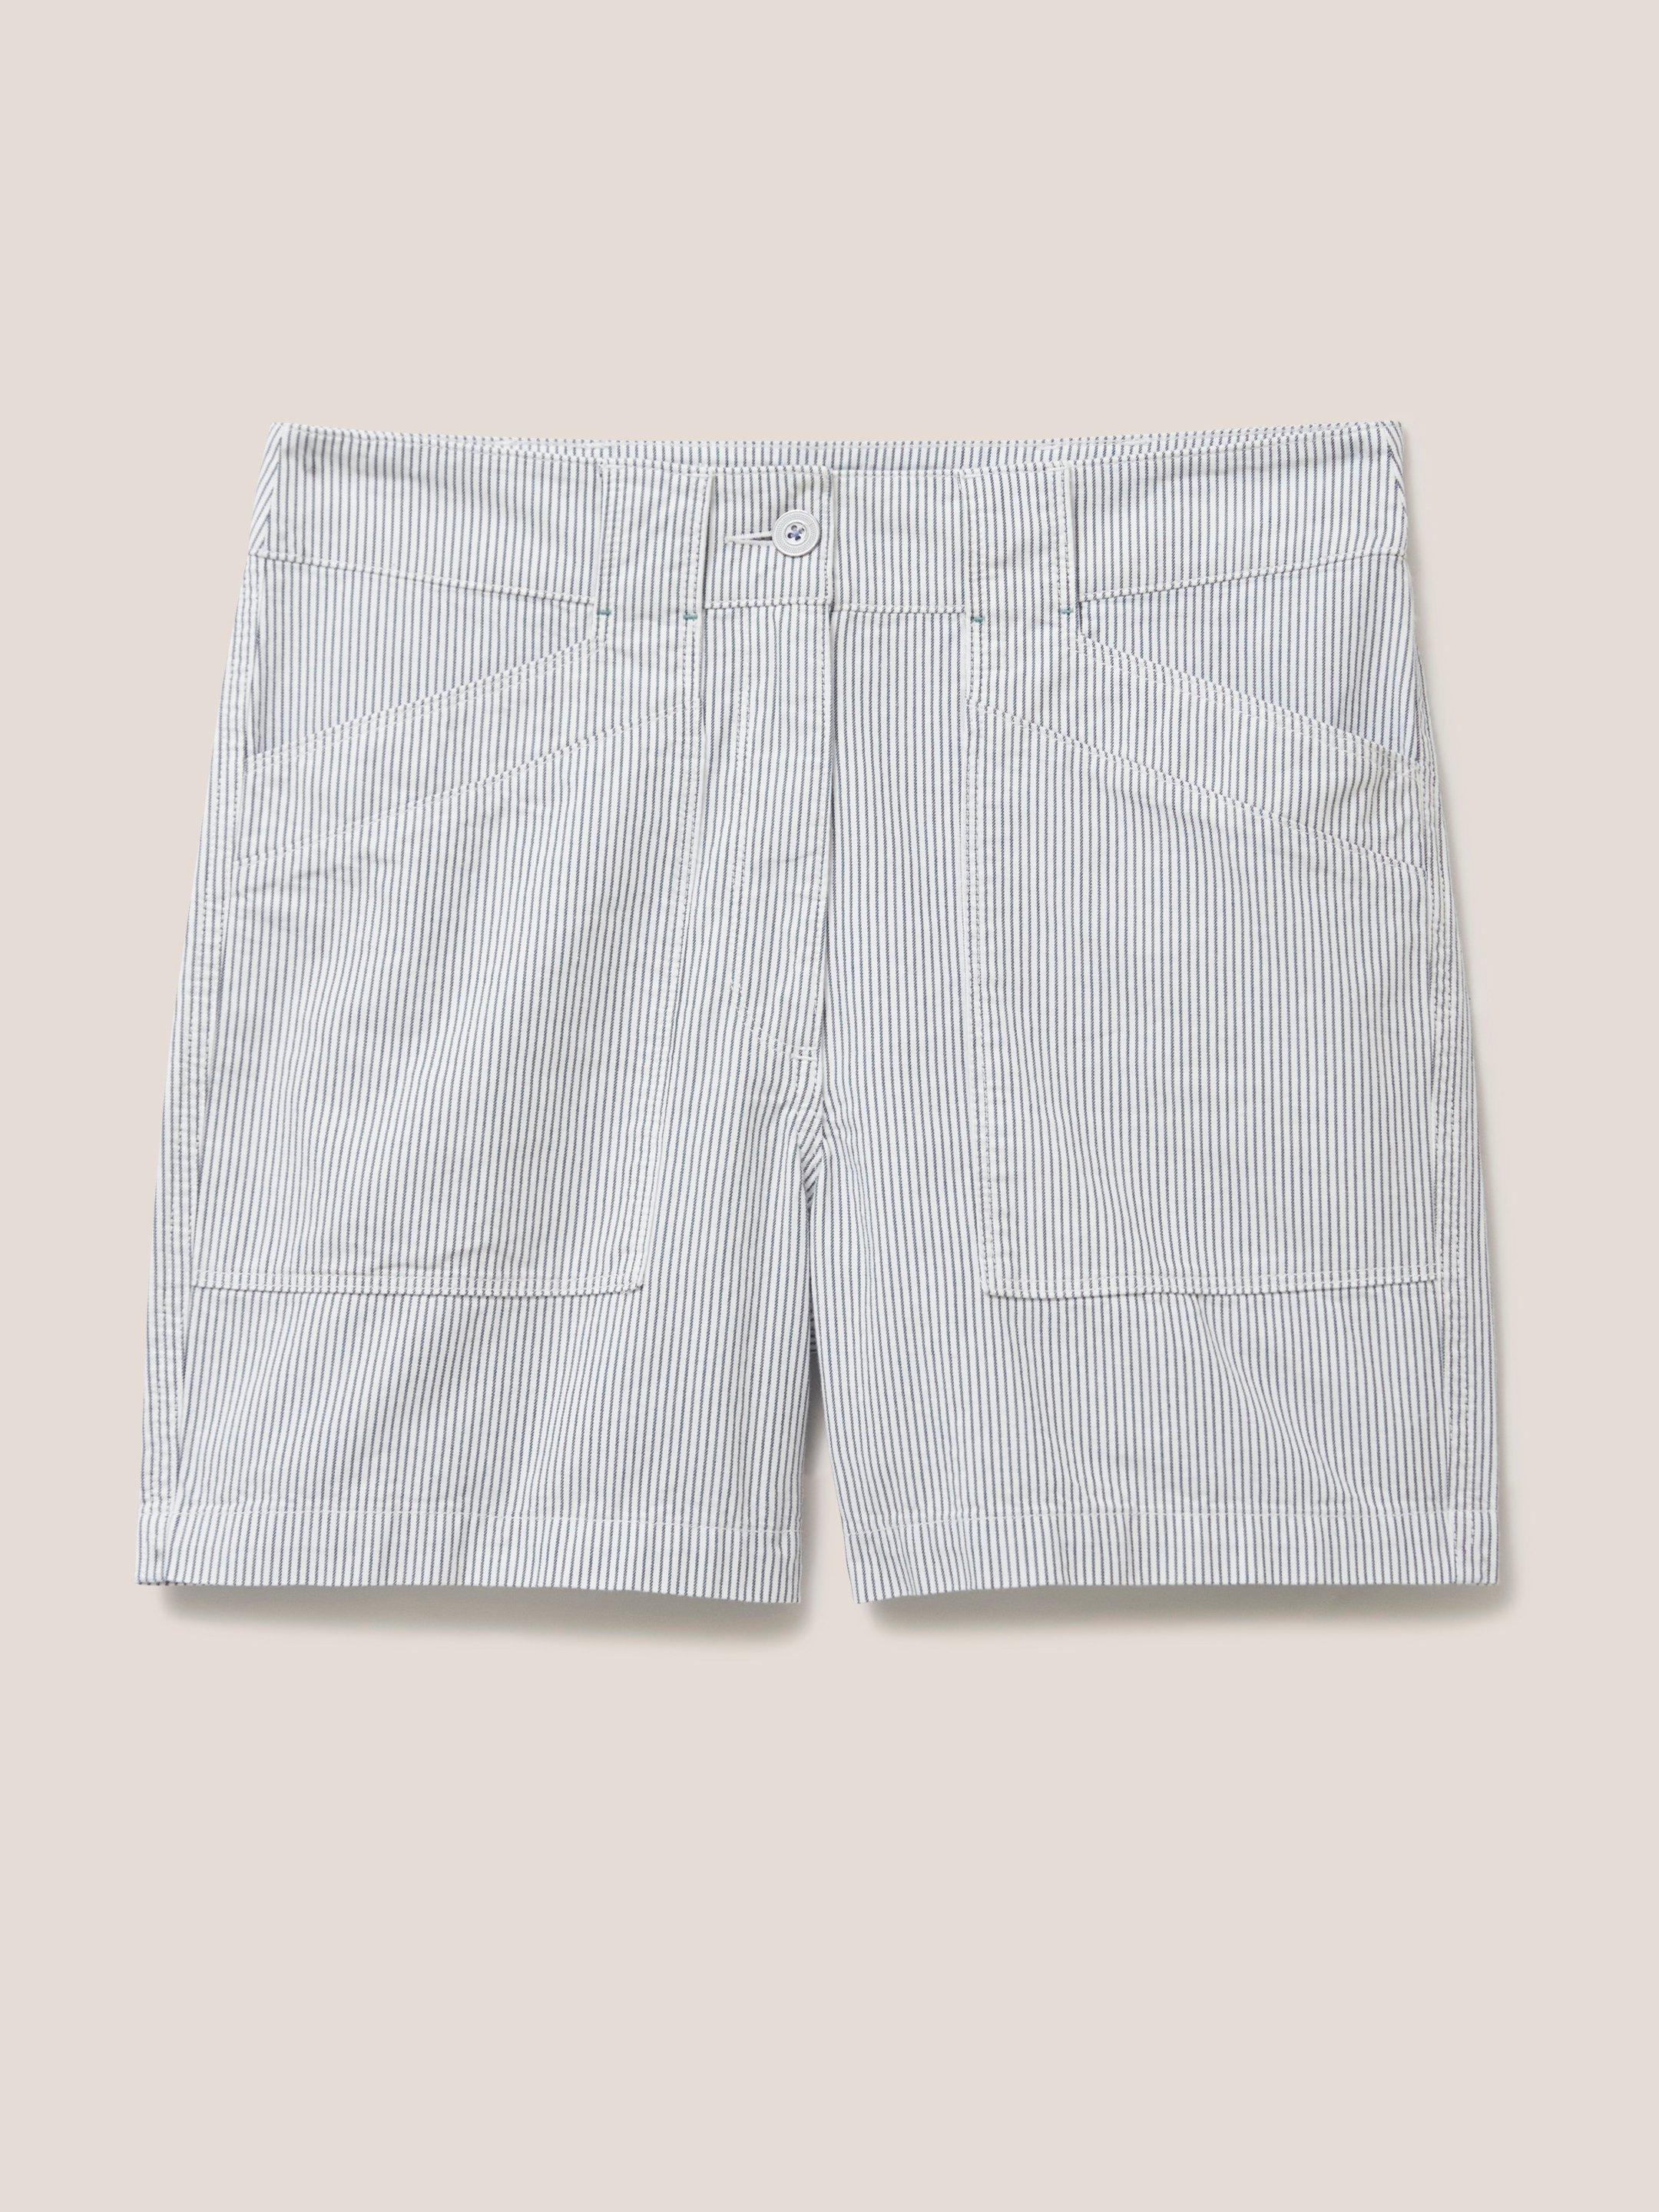 Tessa Chino Shorts in IVORY MLT - FLAT FRONT